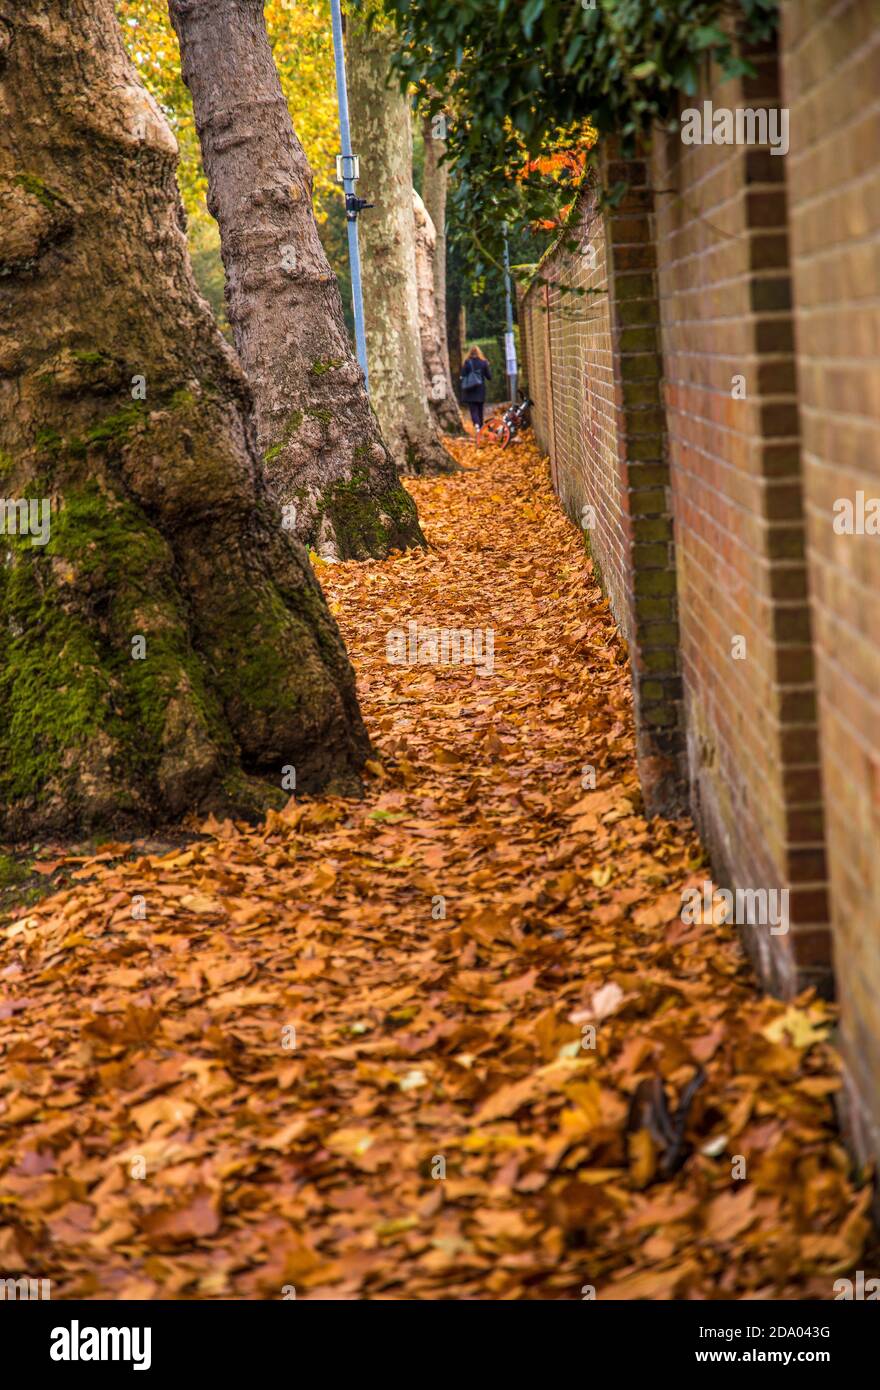 Golden autumn leaves covering the ground beside old large trees and brickwall Stock Photo